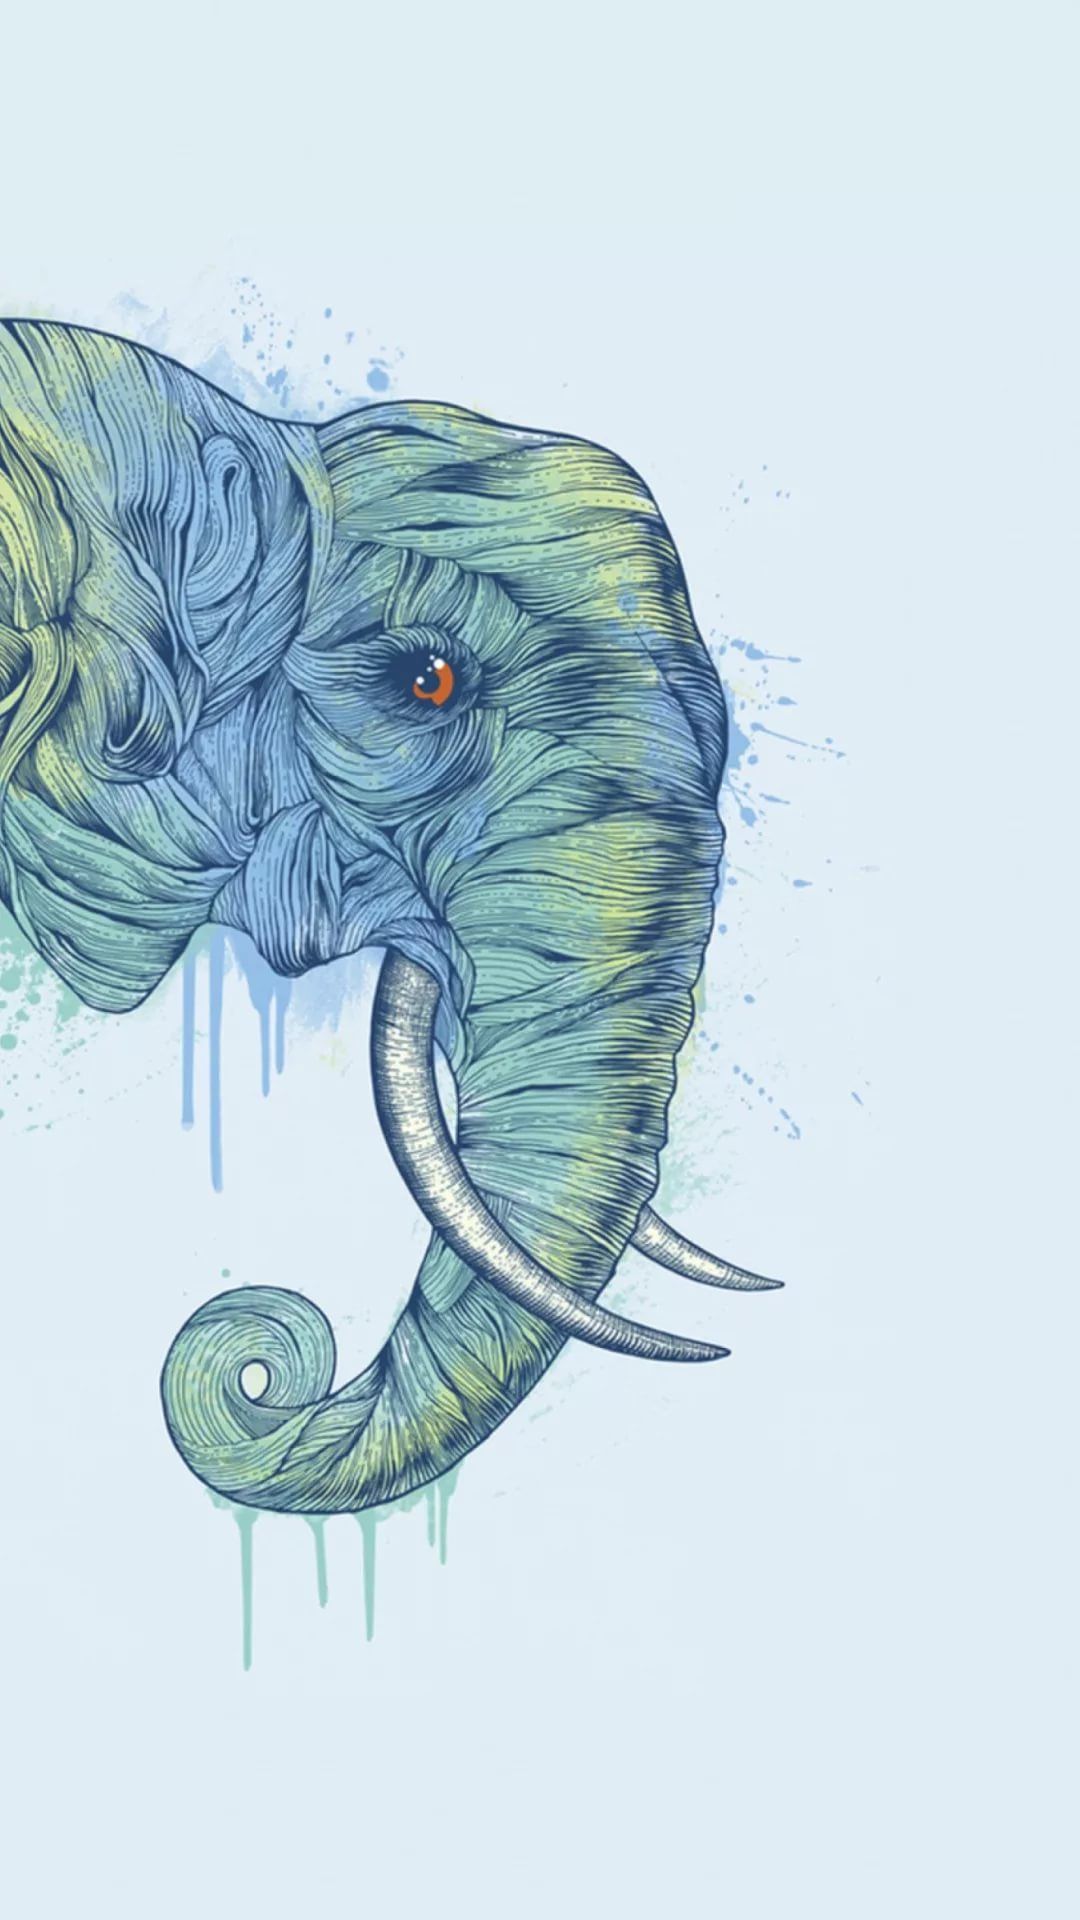 Elephant Tumblr wallpaper for android